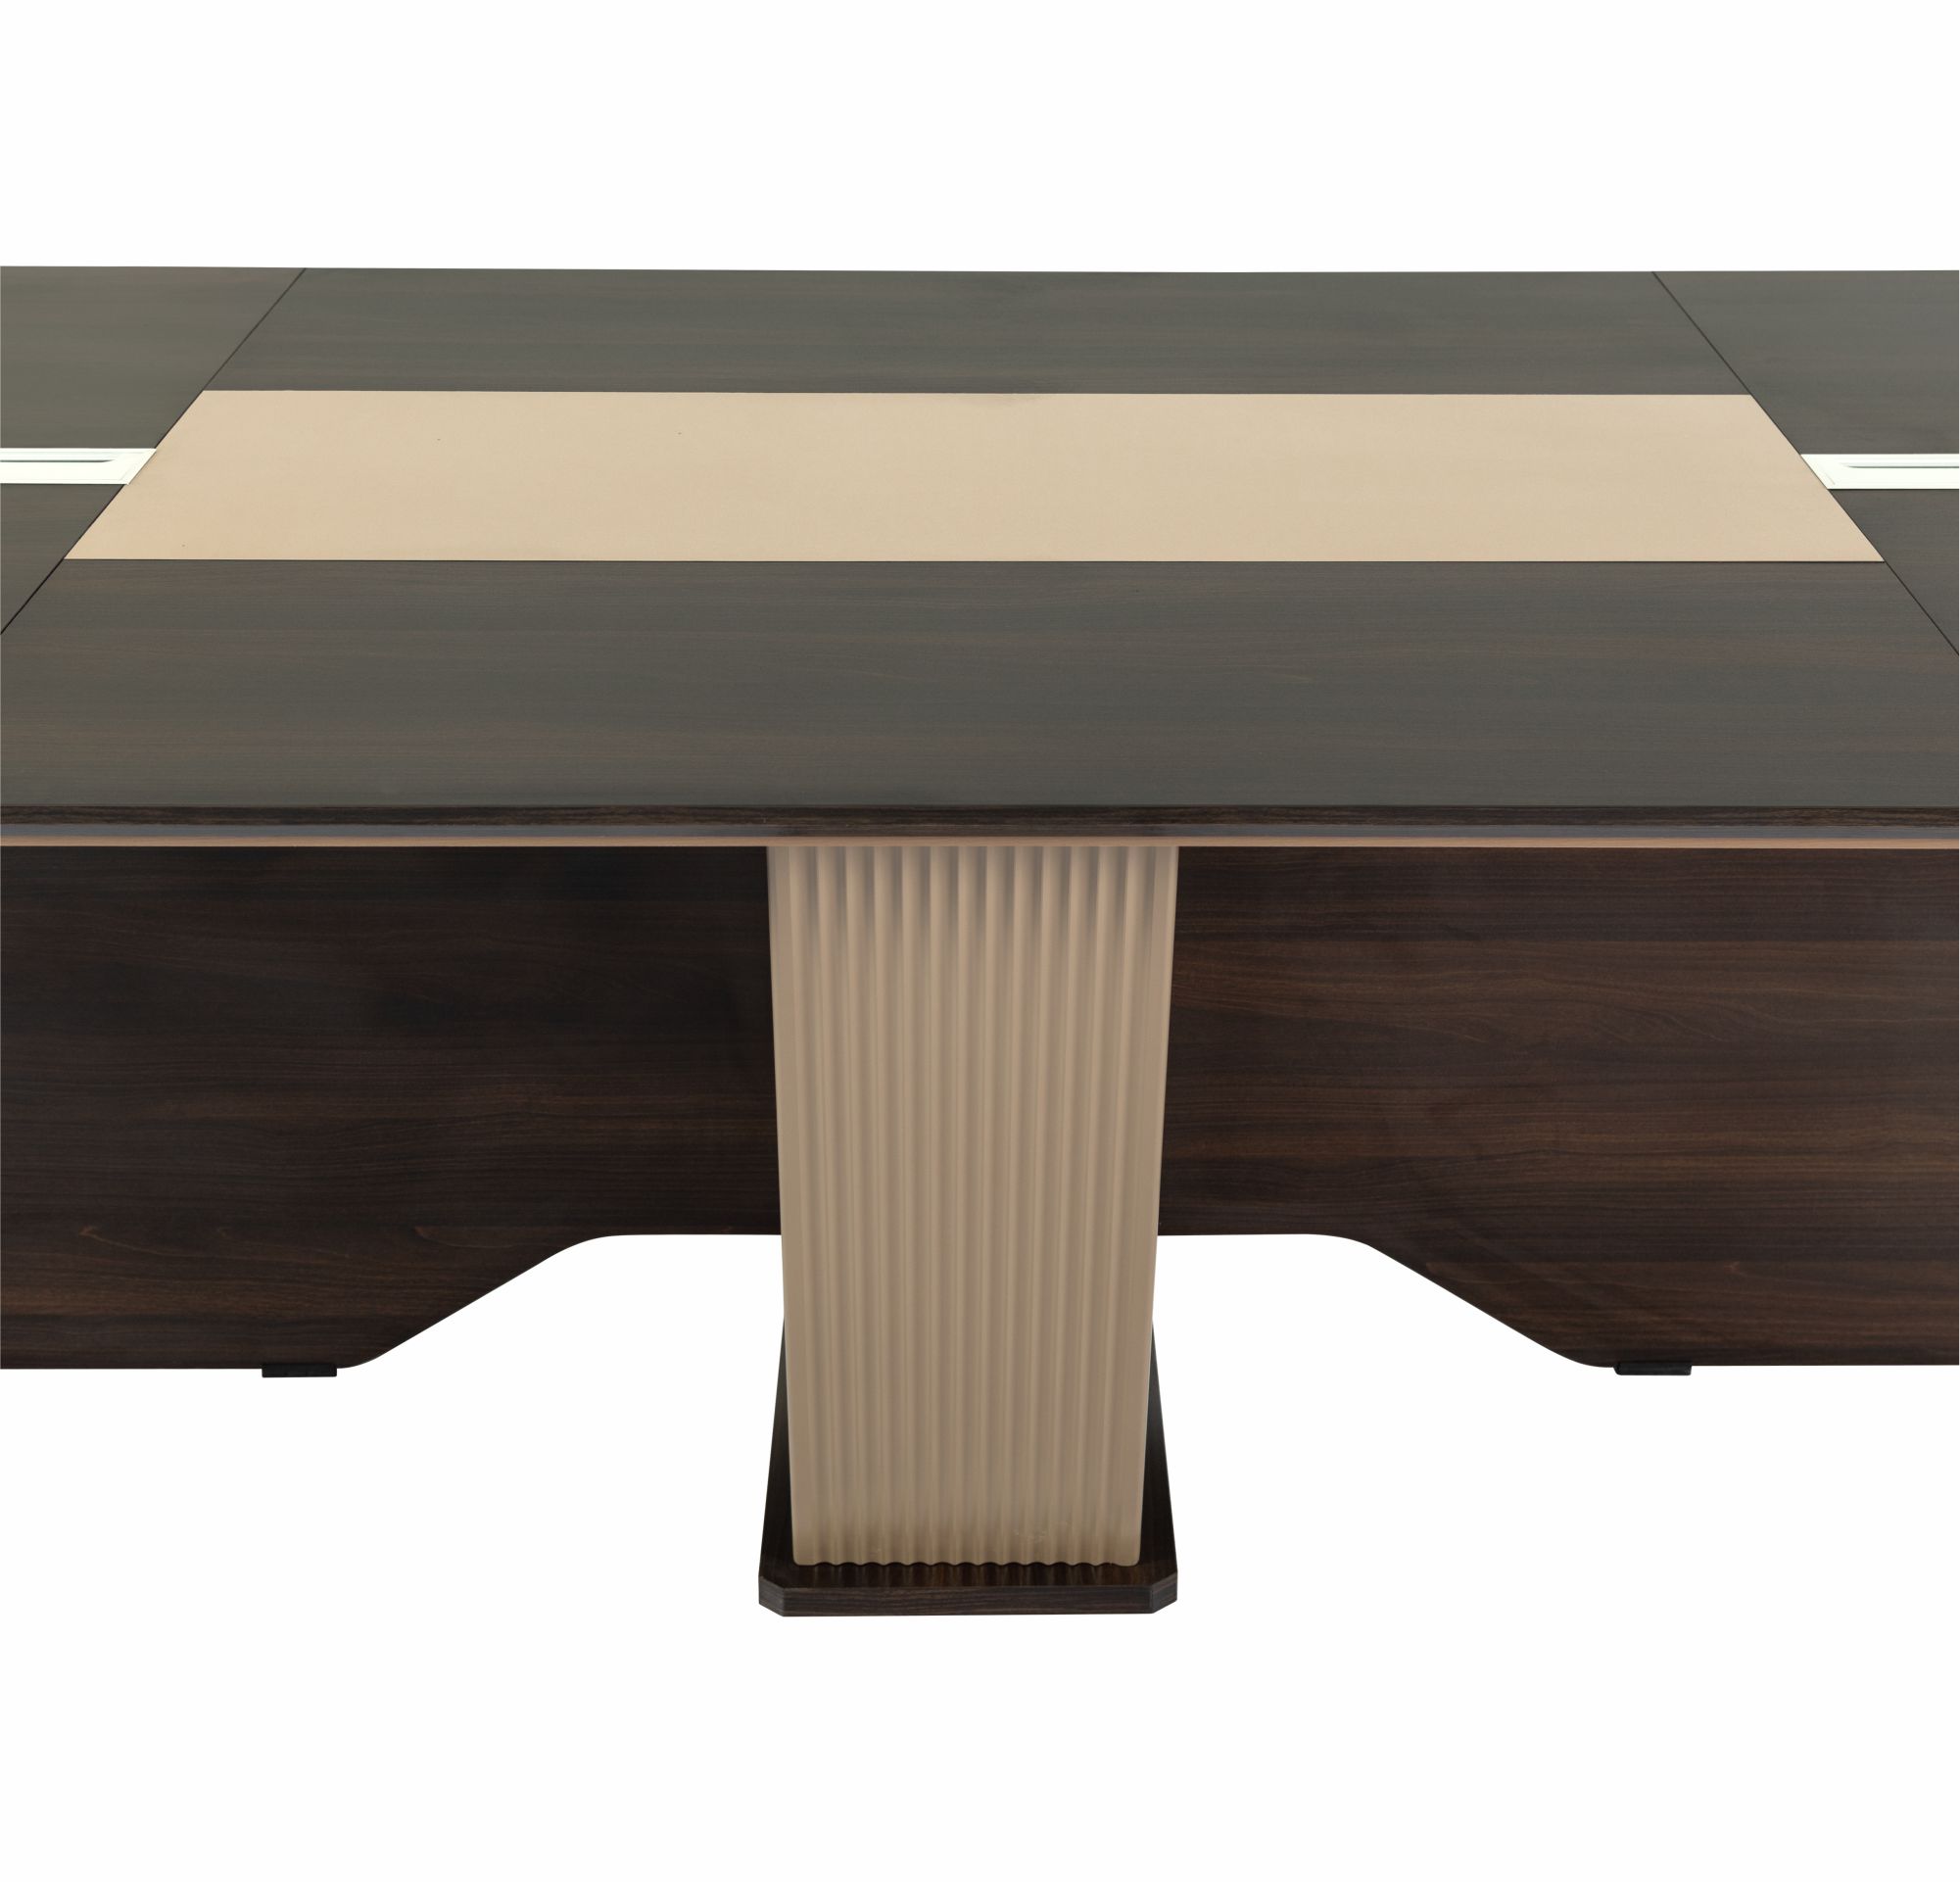 KCF023-Conference Table-M42/M51